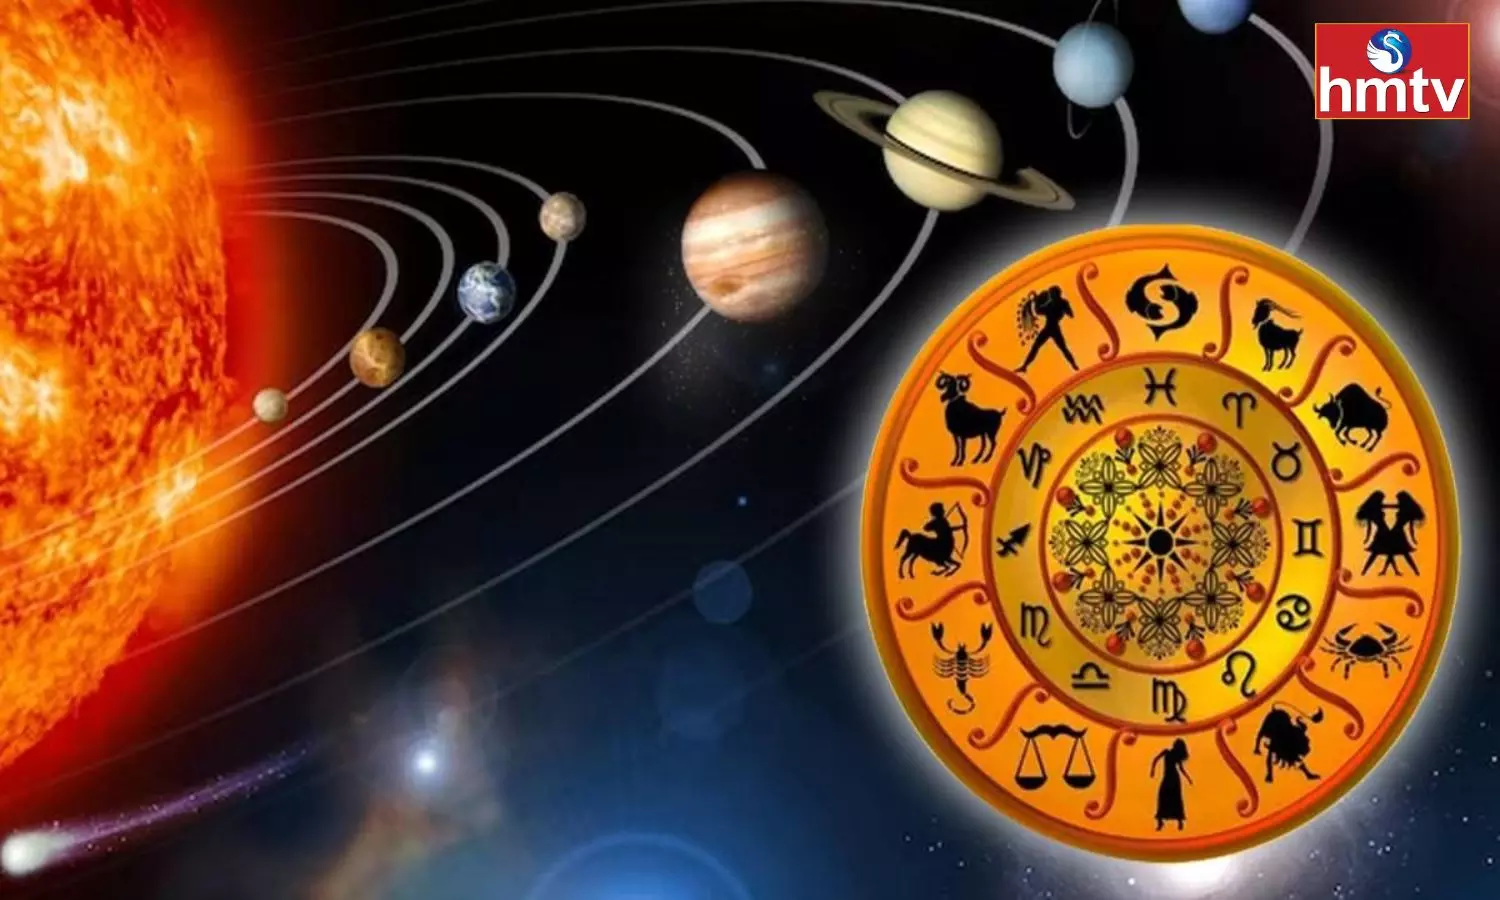 On March 15 Sun Enters Pisces Luck Will Come To The People Of These Planets